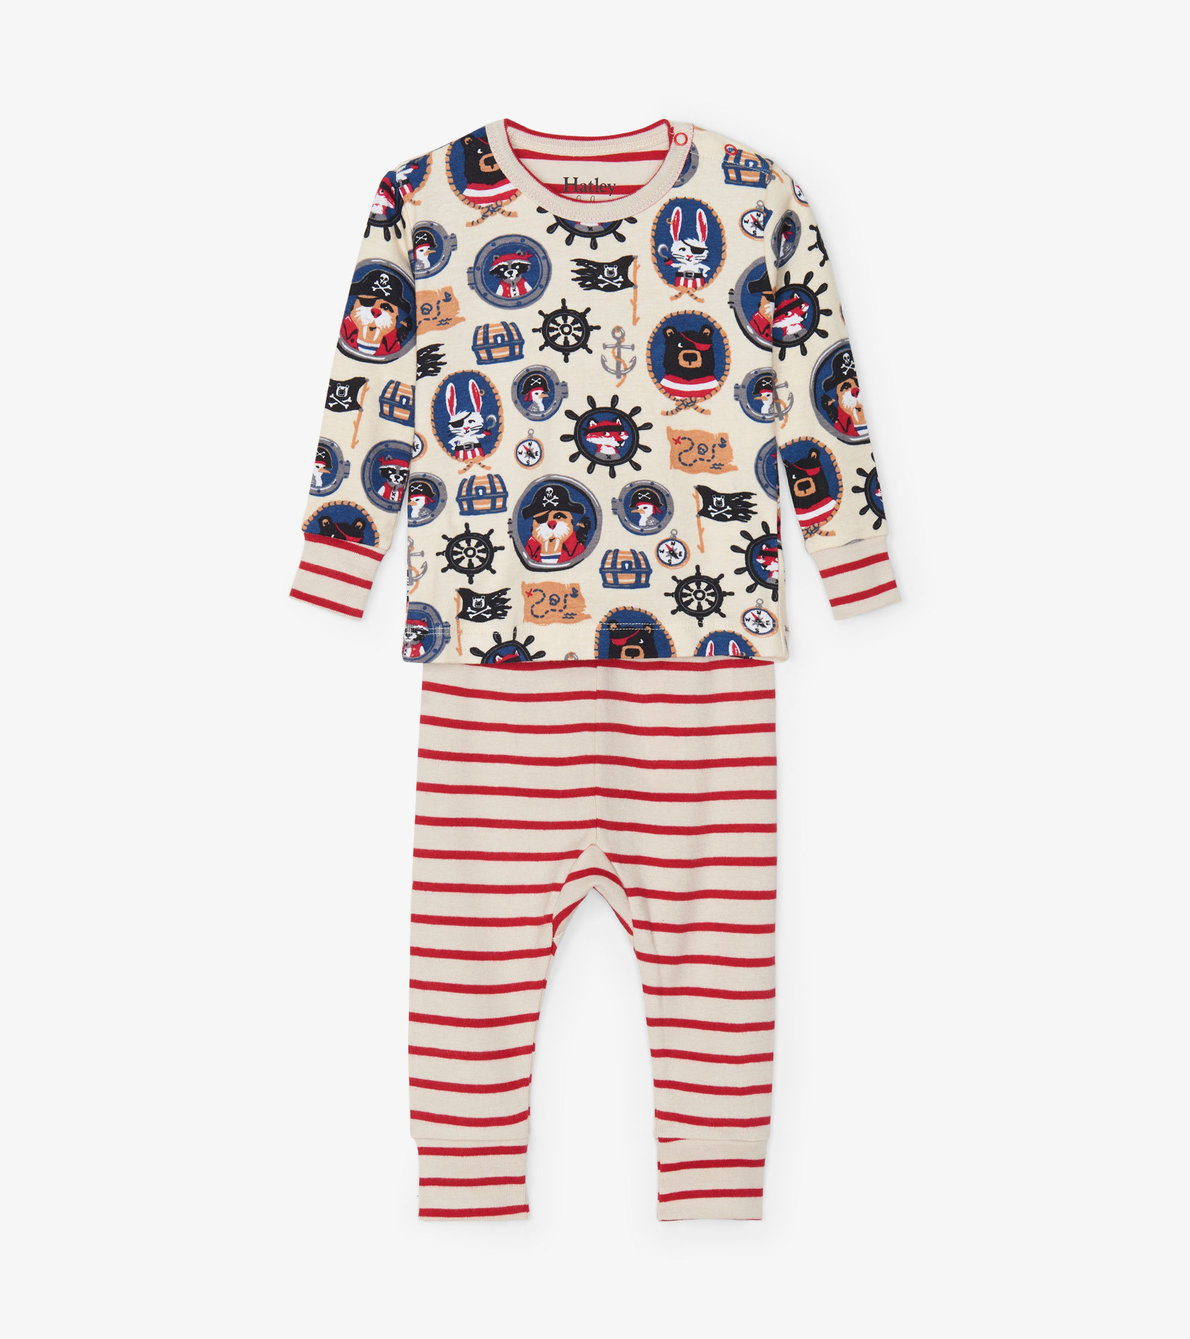 View larger image of Pirate Portraits Baby Pajama Set